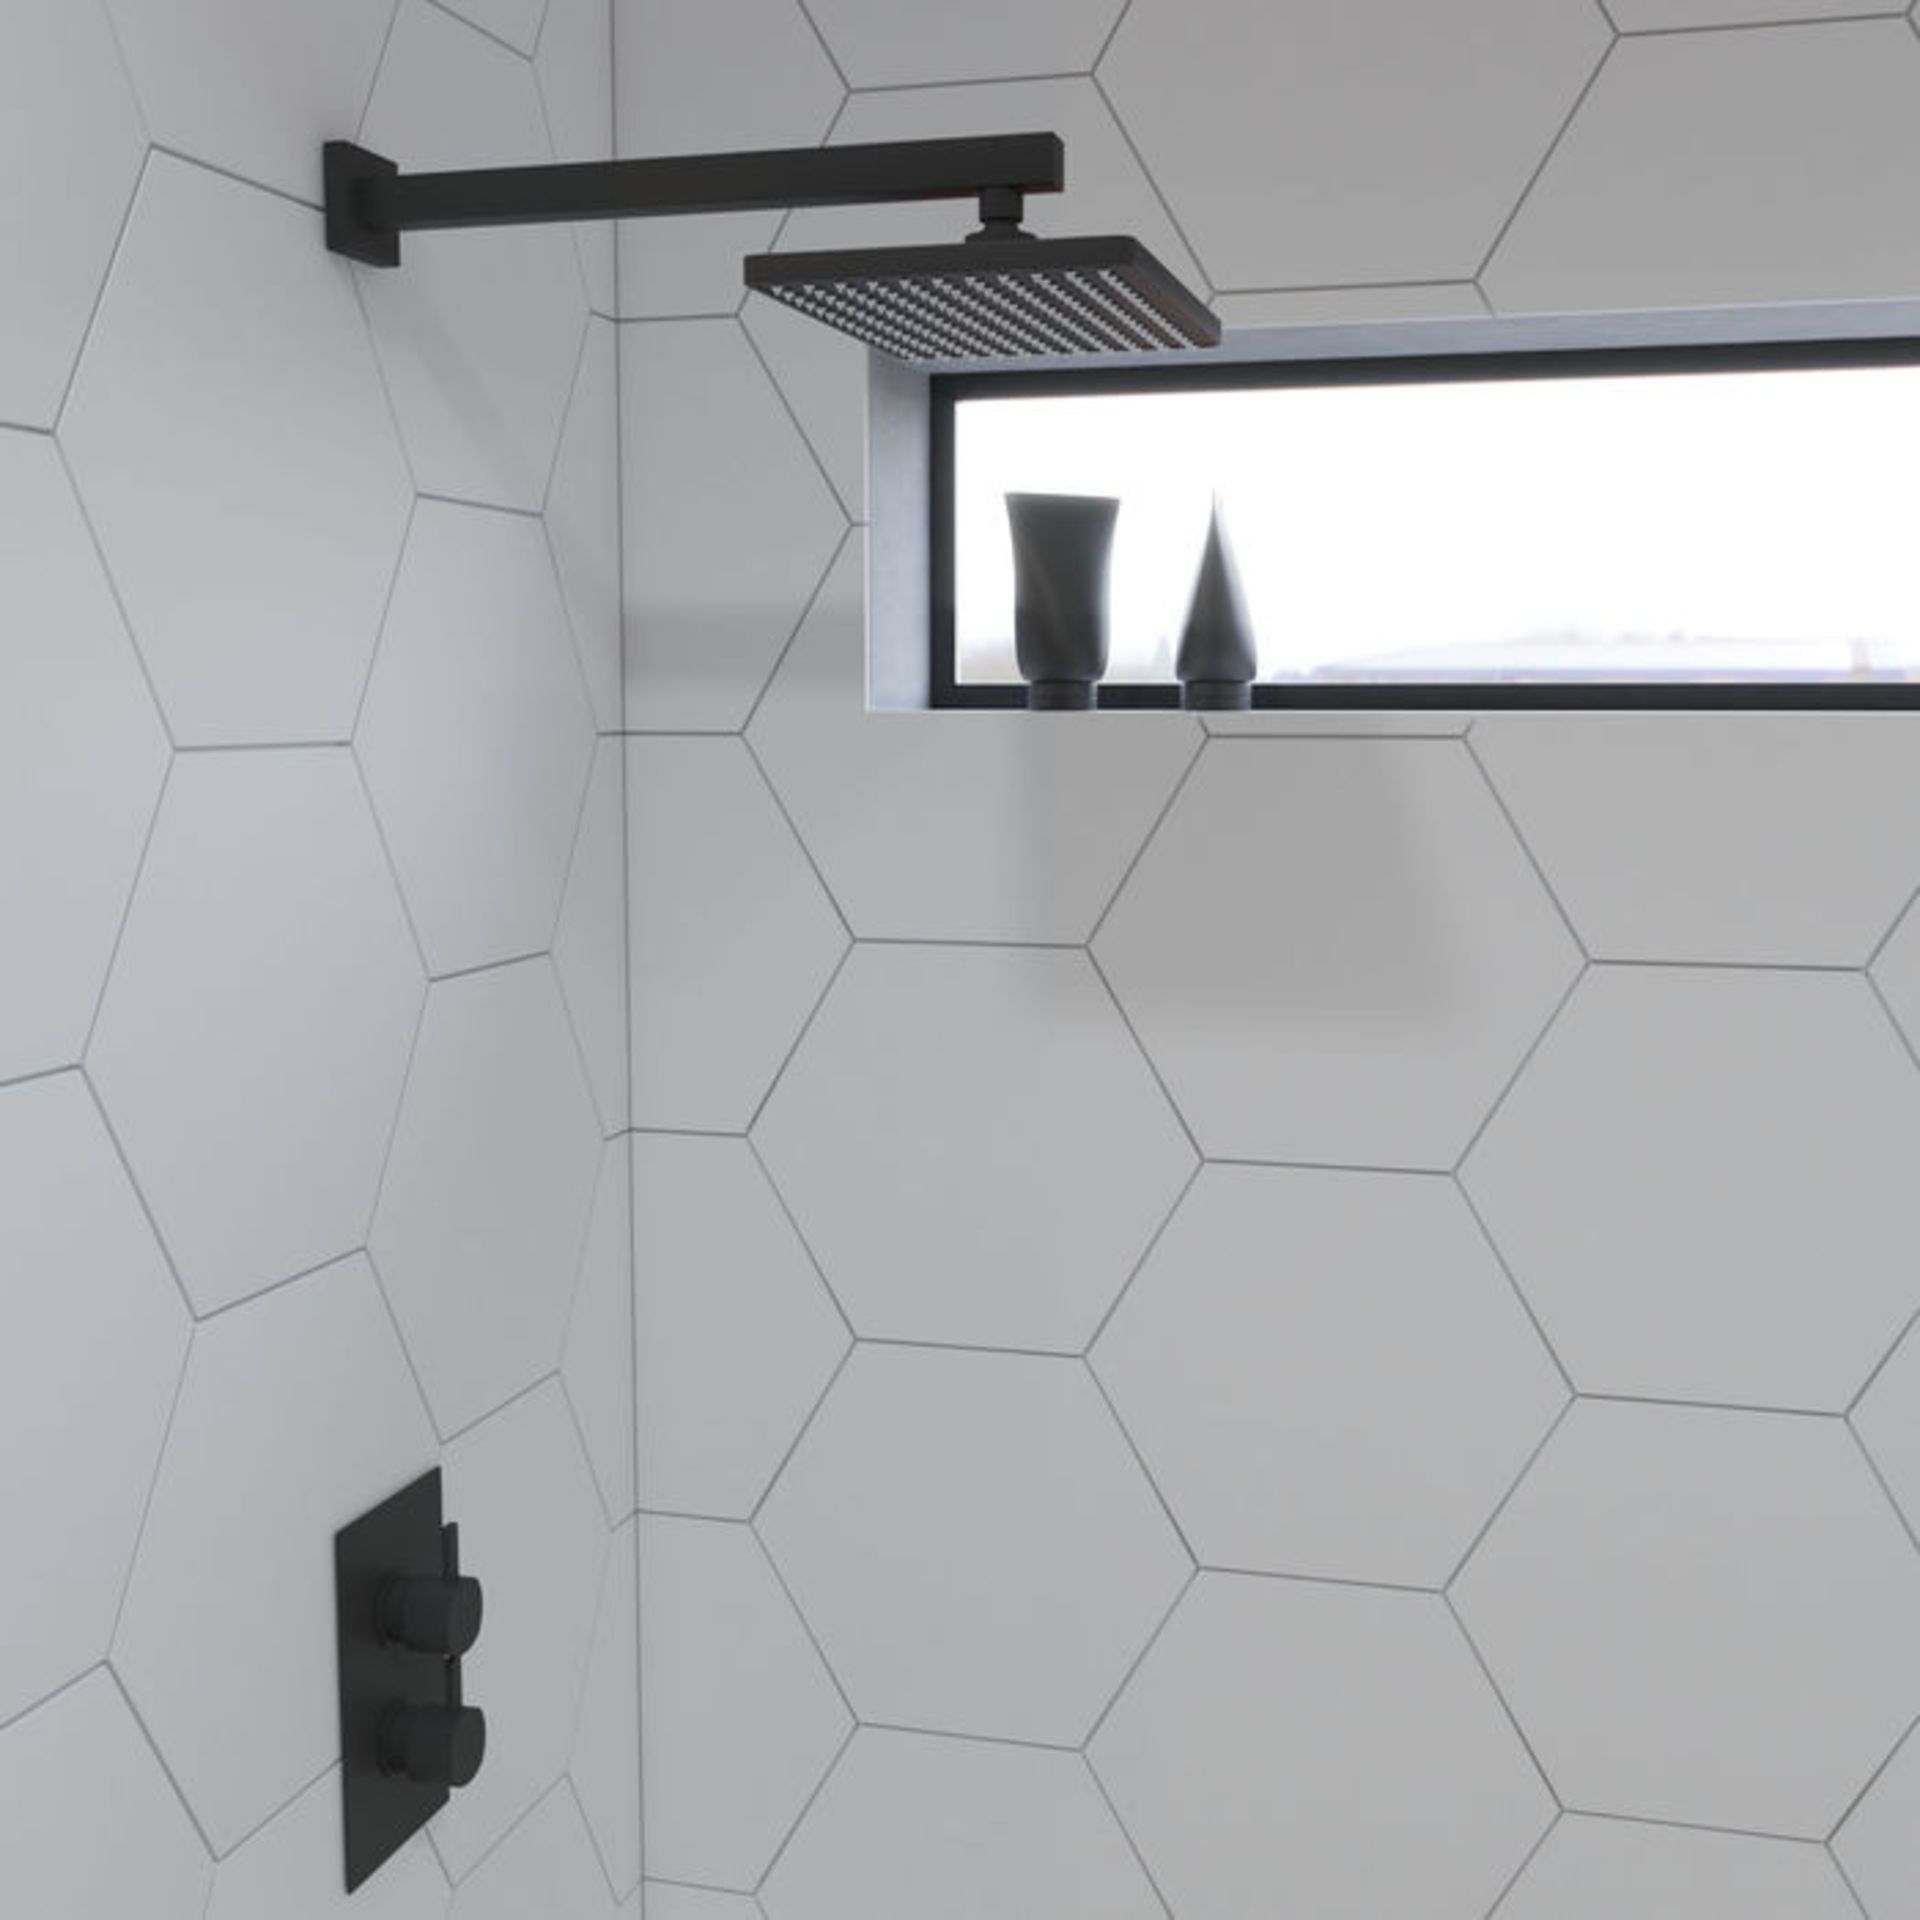 (CT203) Iker Matte Black Shower. Introducing The Hotel Collection - Everyday Eclectic Luxurious